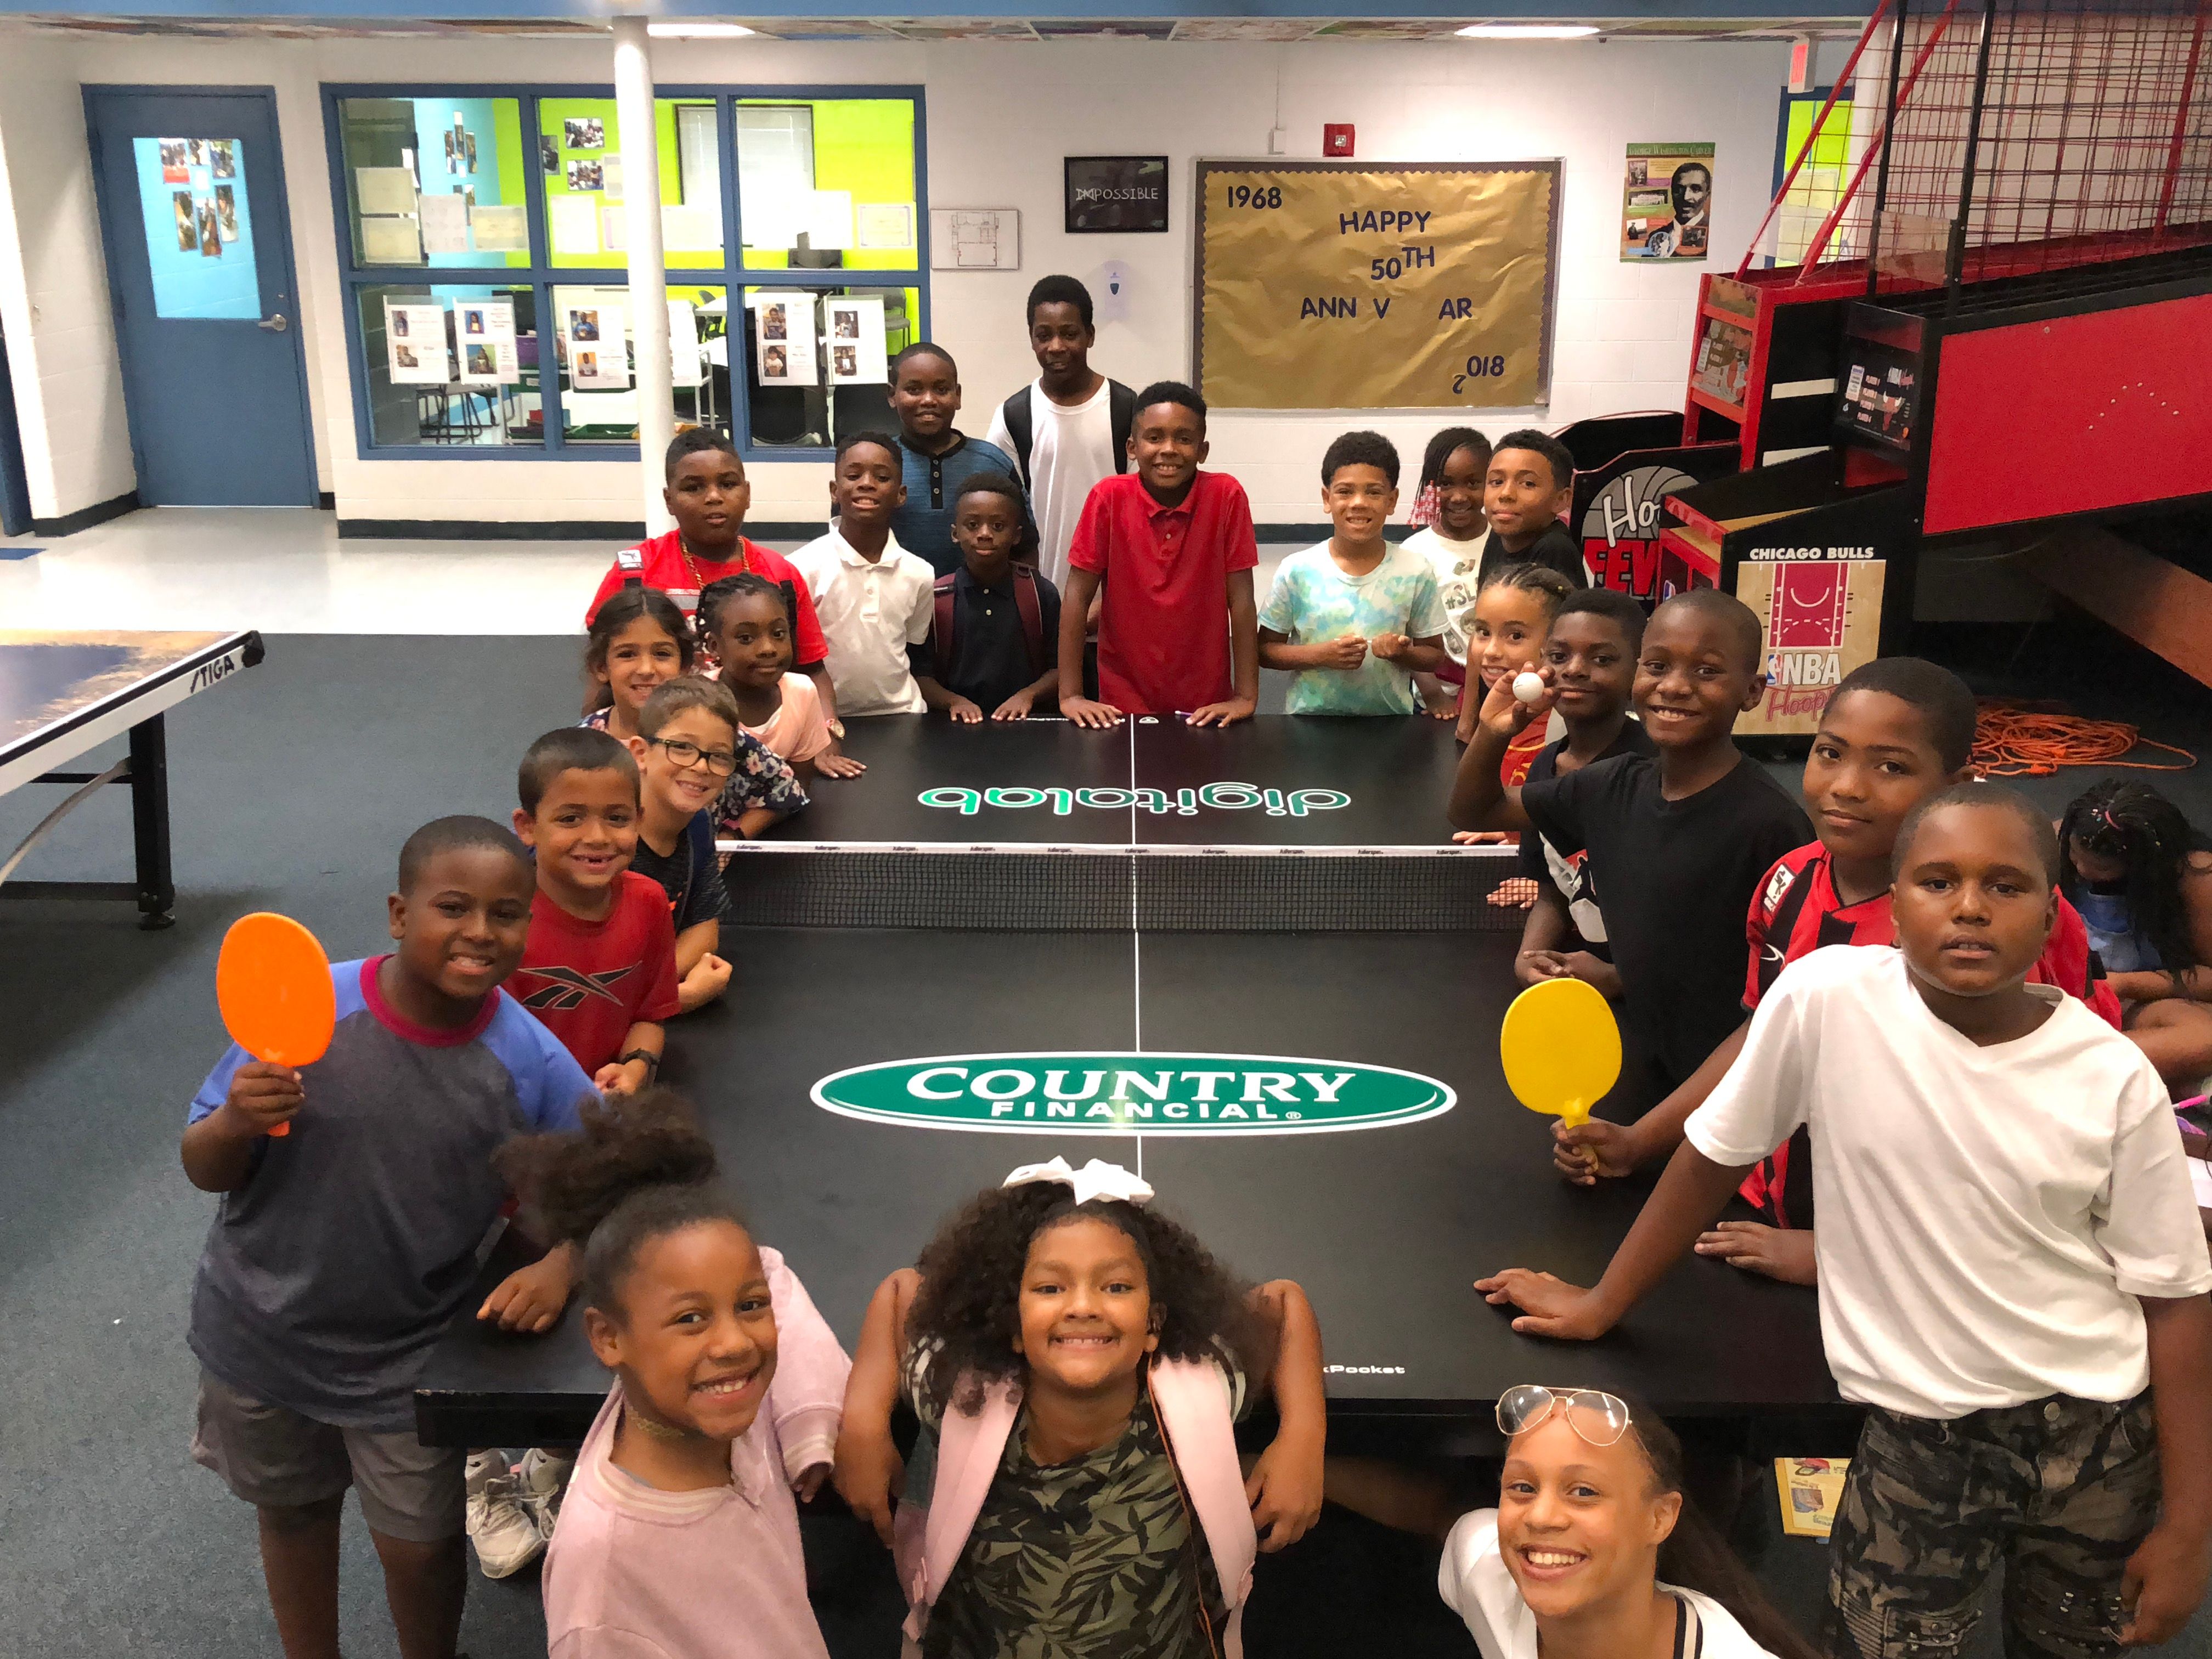 Thank you Country Financial for the donation of the amazing ping pong table!